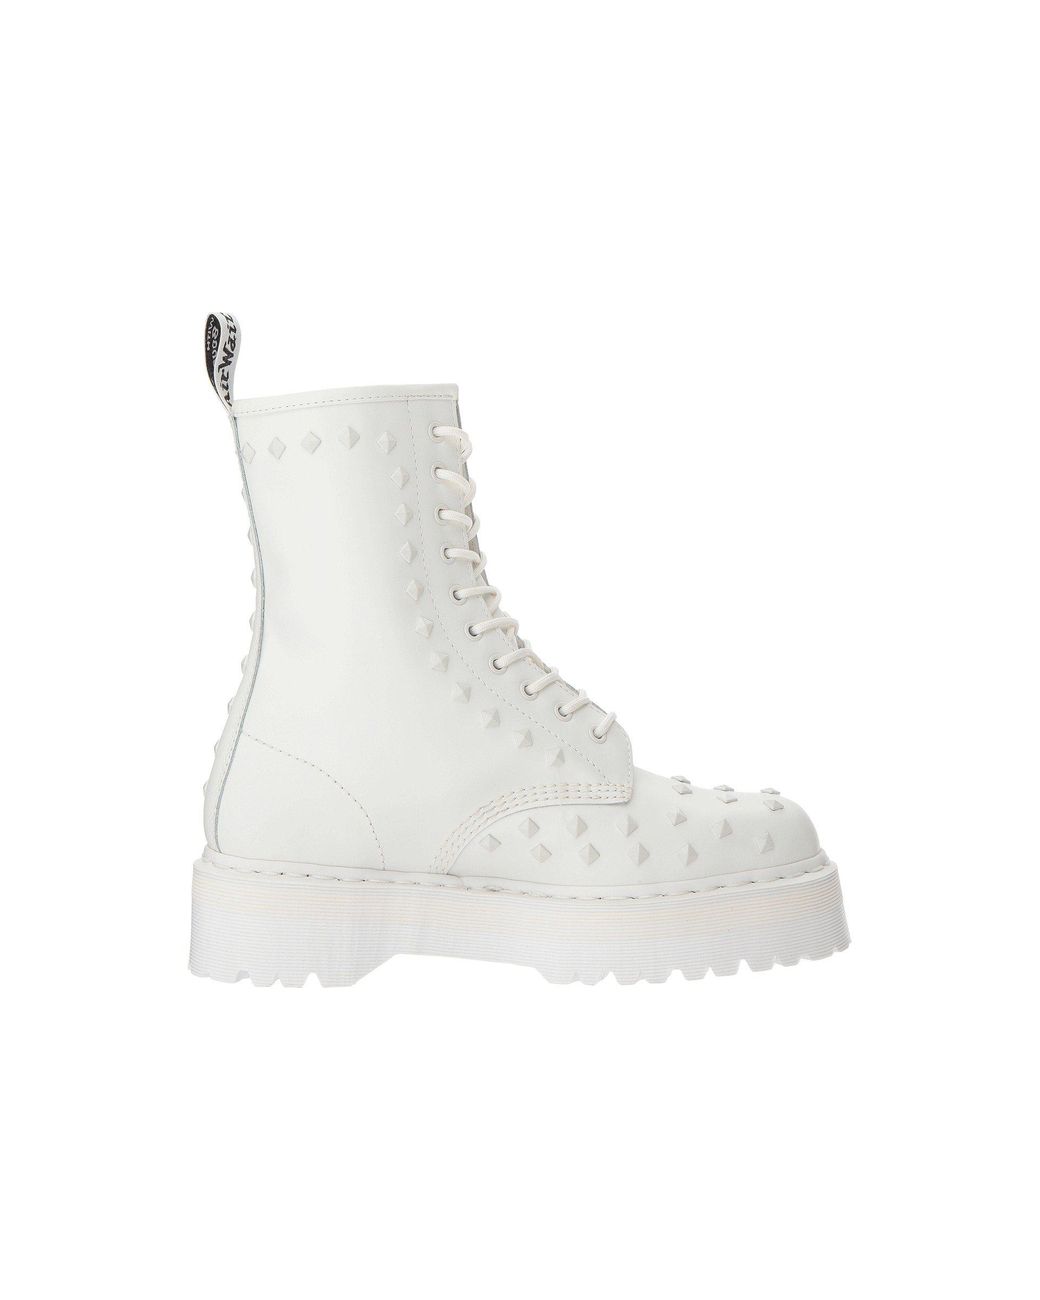 Dr. Martens Leather 1490 Stud in White | Lyst